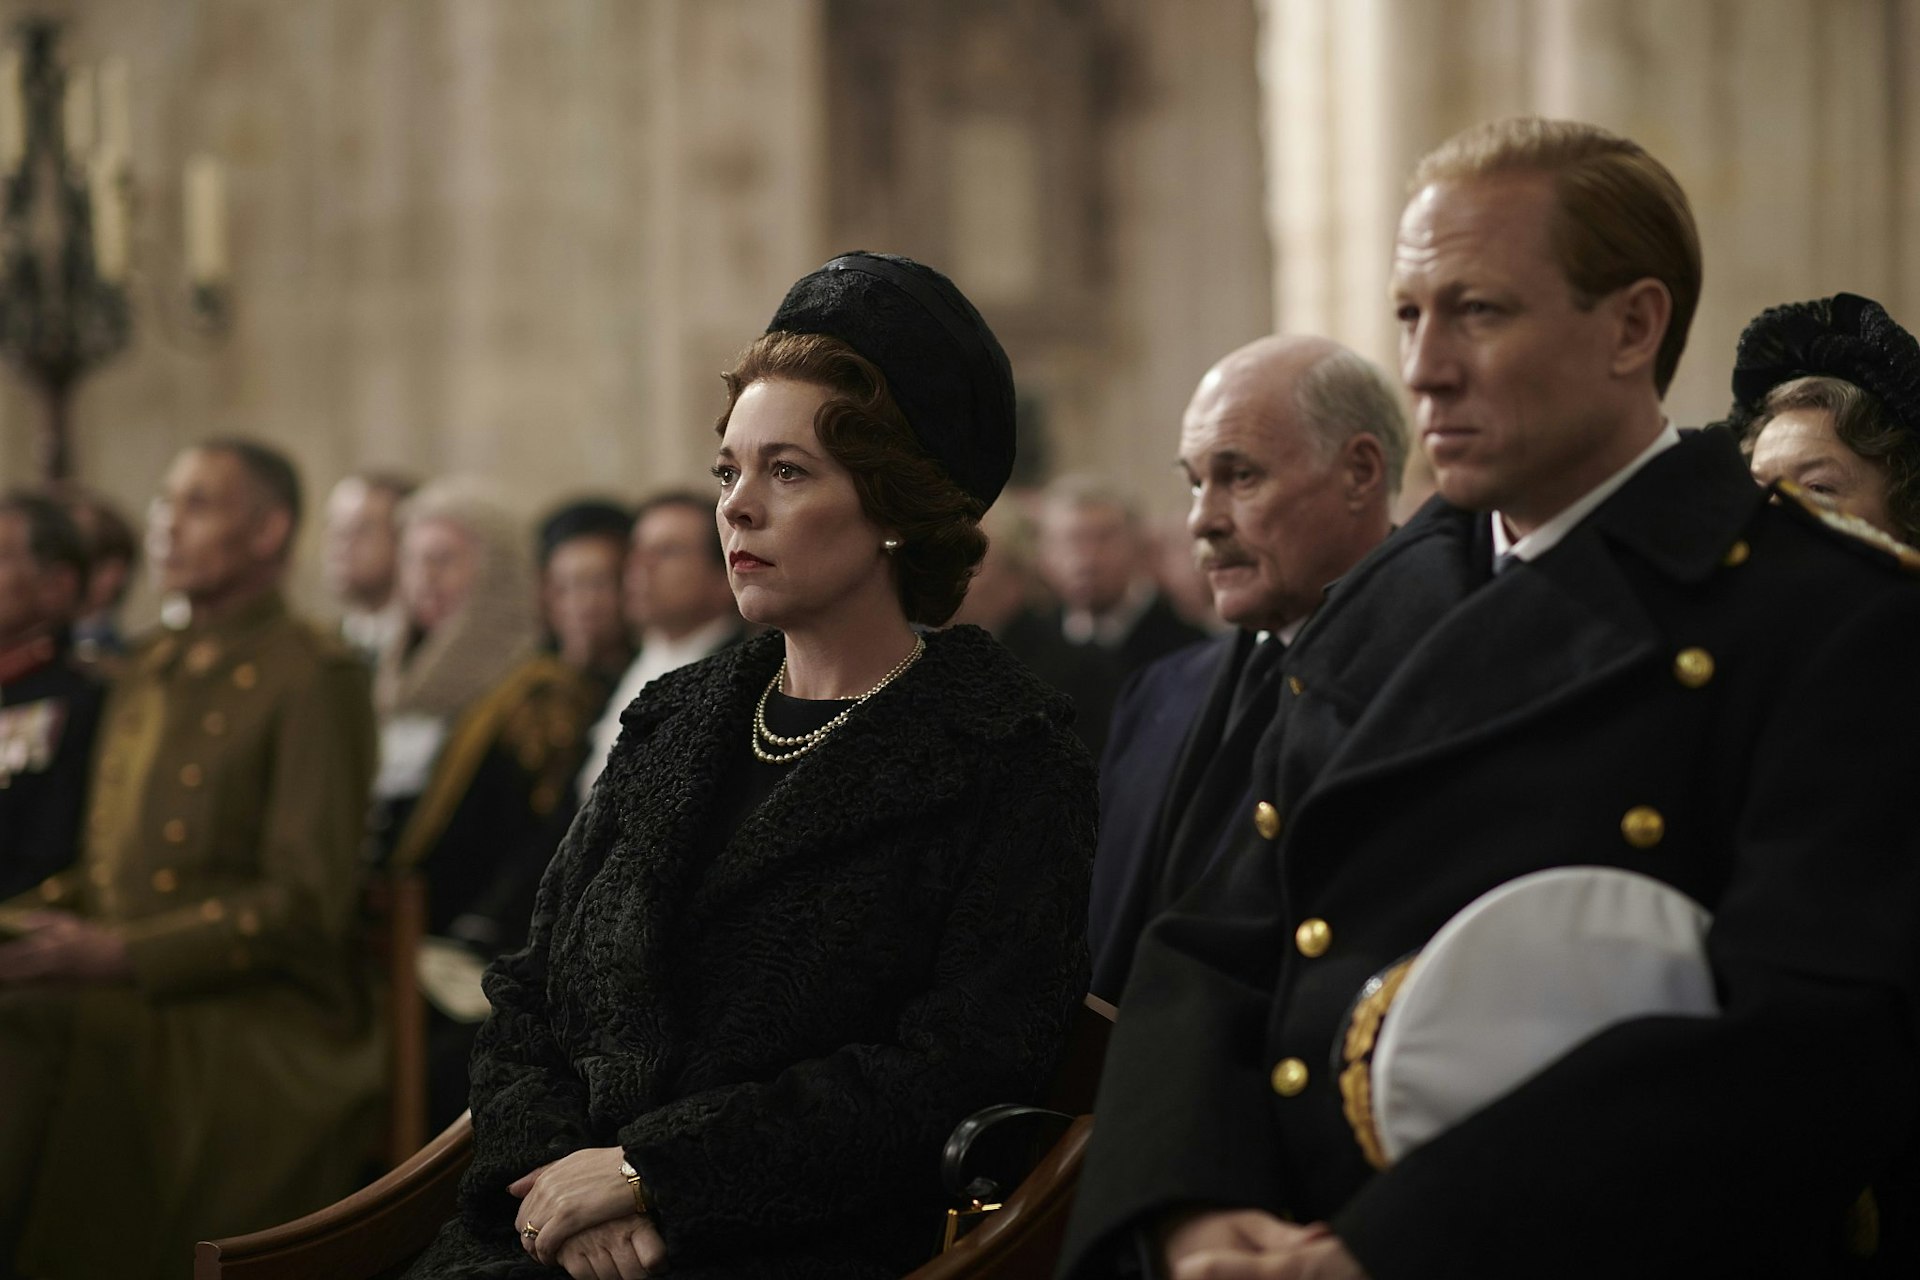 A still from The Crown season 3; Olivia Colman as the Queen and Tobias Menzies as Prince Philip are dressed in black at a cathedral funeral service.